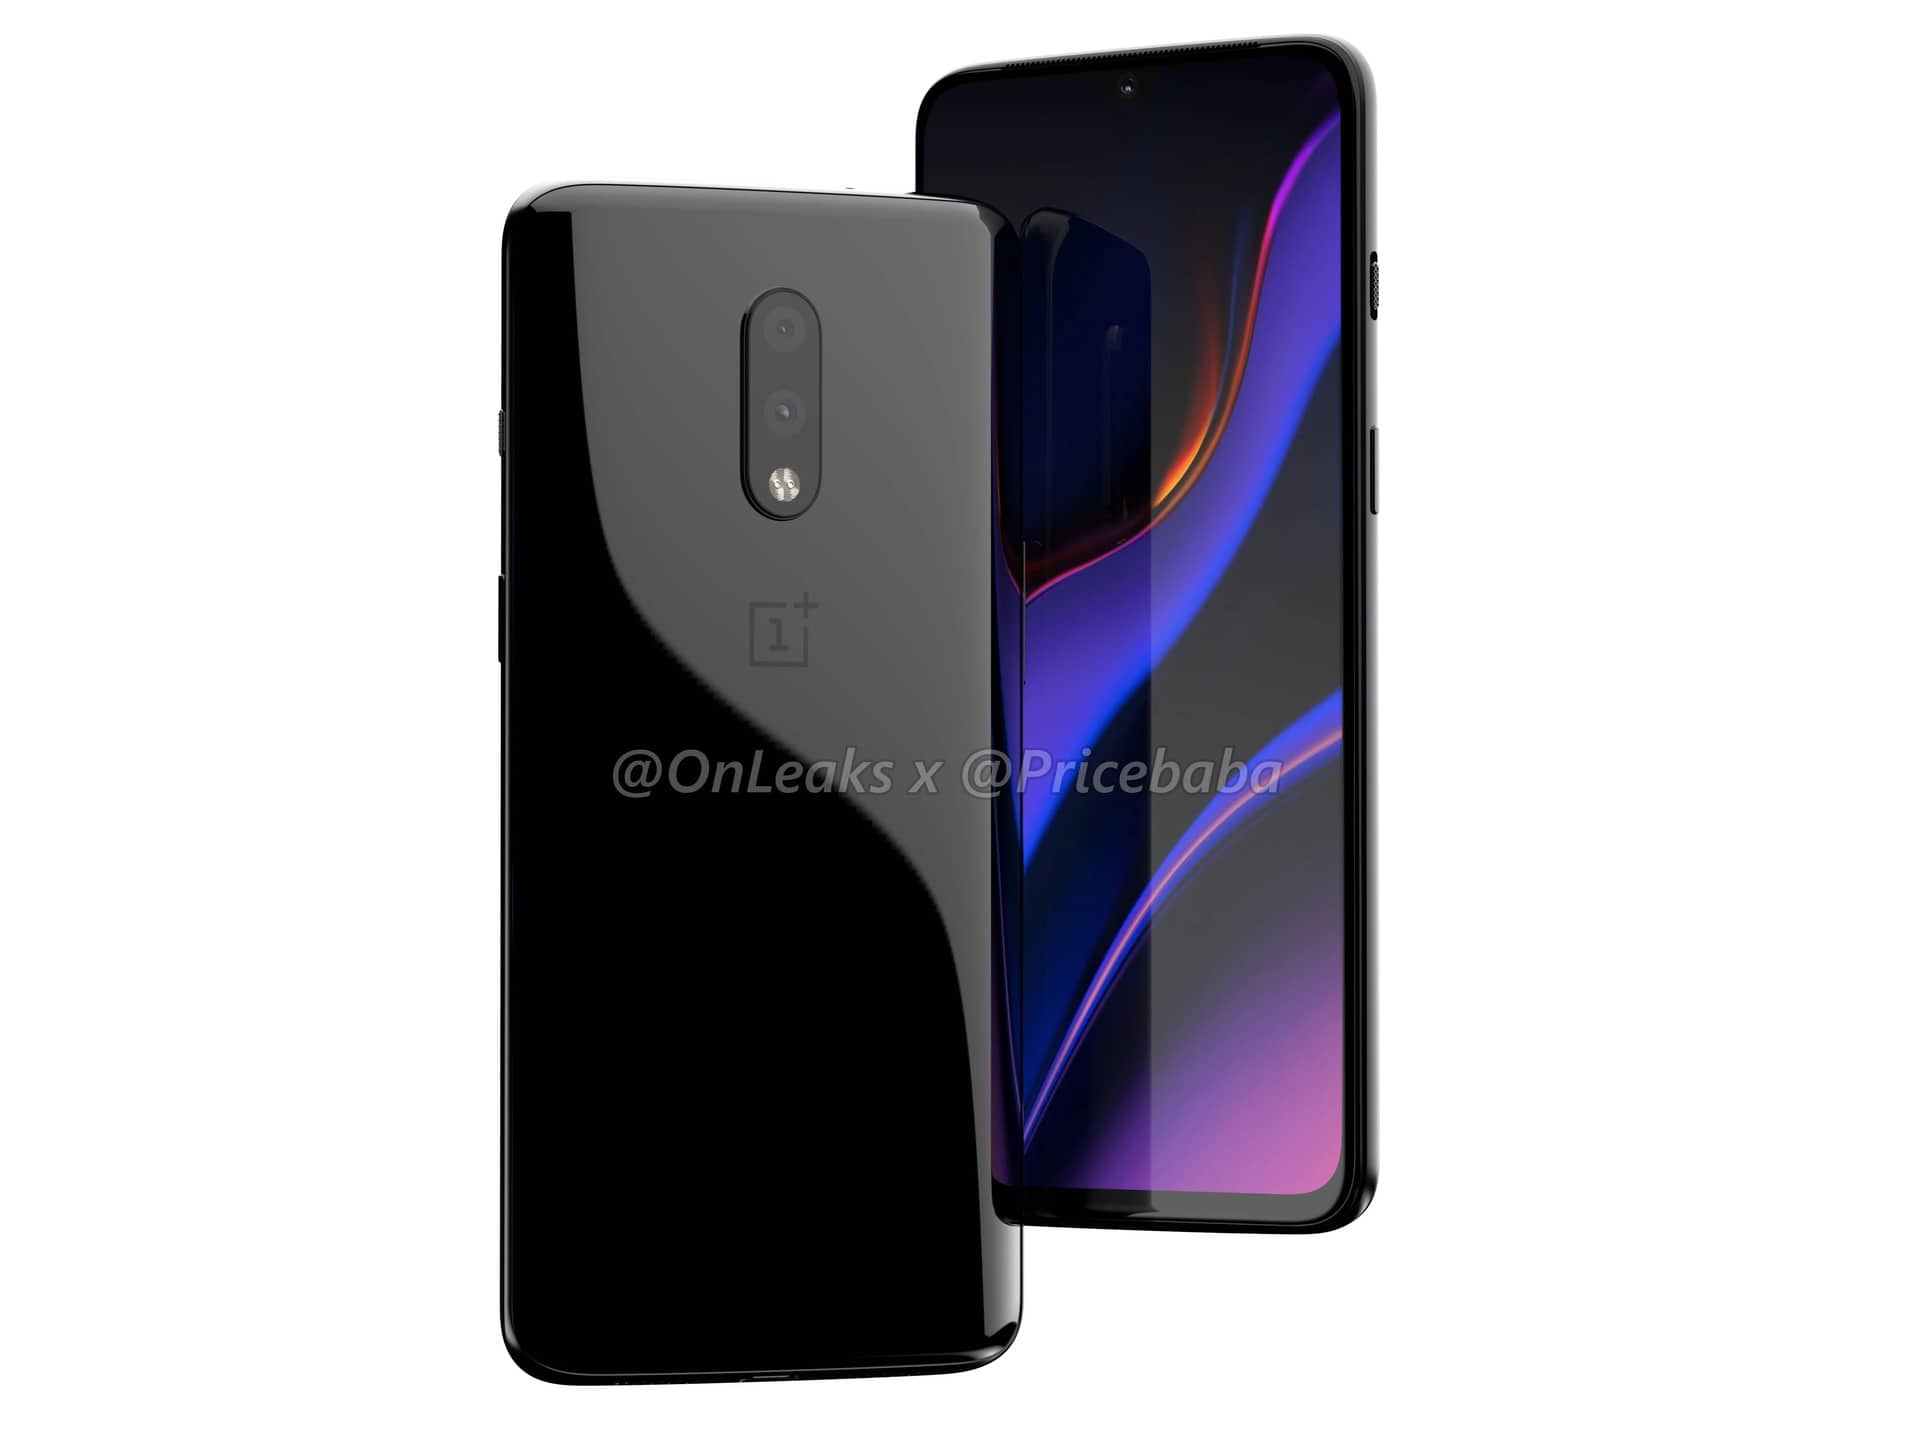 OnePlus 7 renders showing the handset from the front and back.